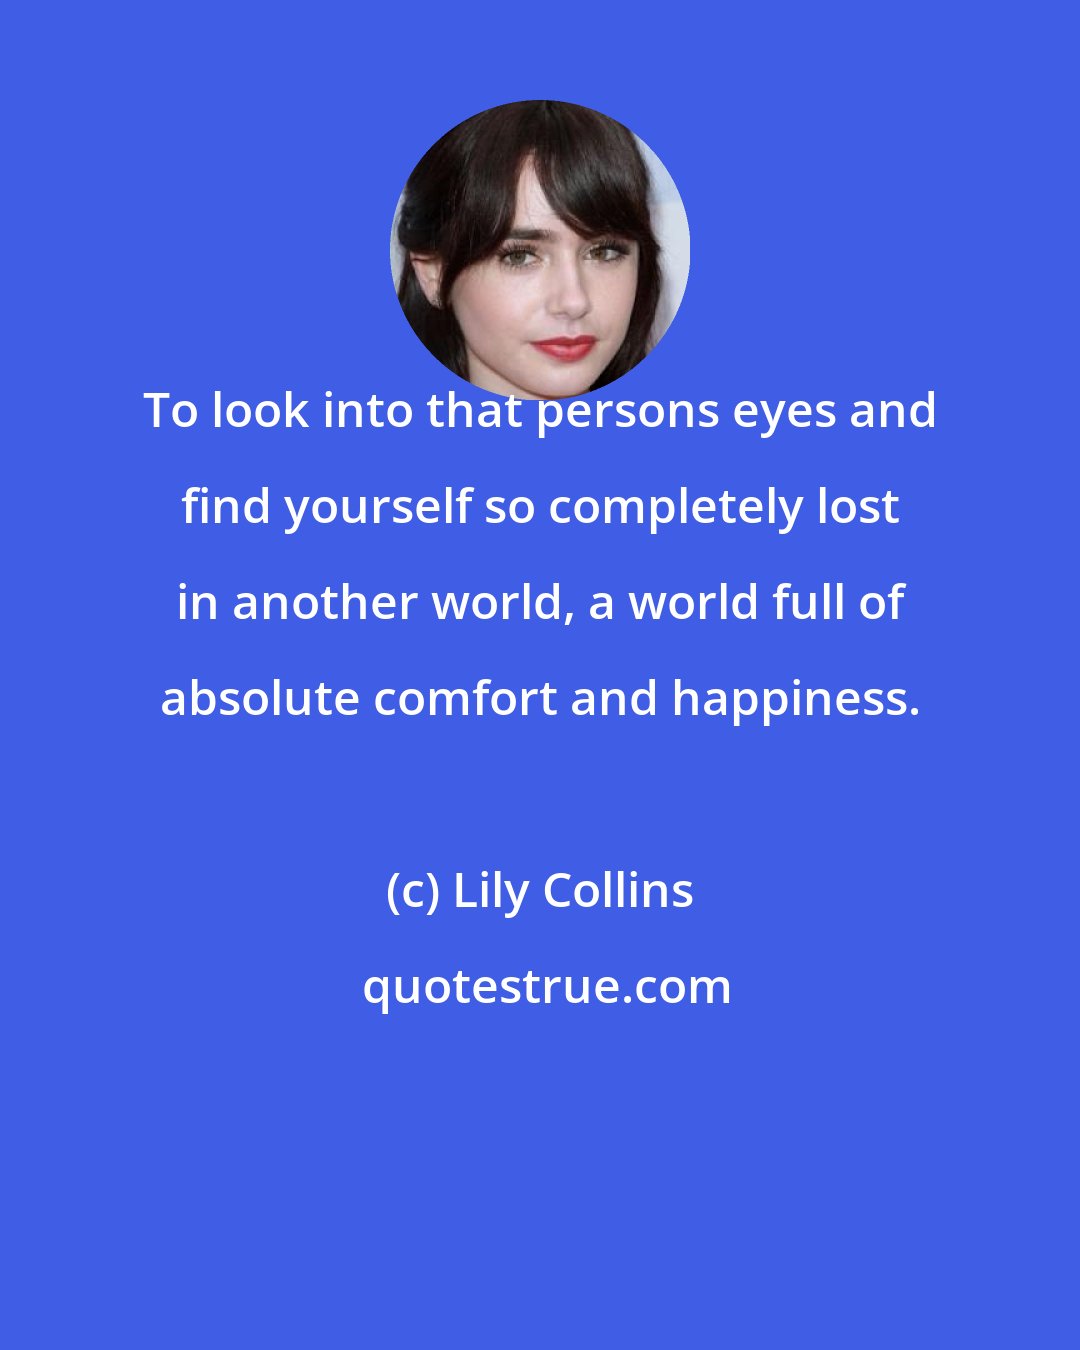 Lily Collins: To look into that persons eyes and find yourself so completely lost in another world, a world full of absolute comfort and happiness.